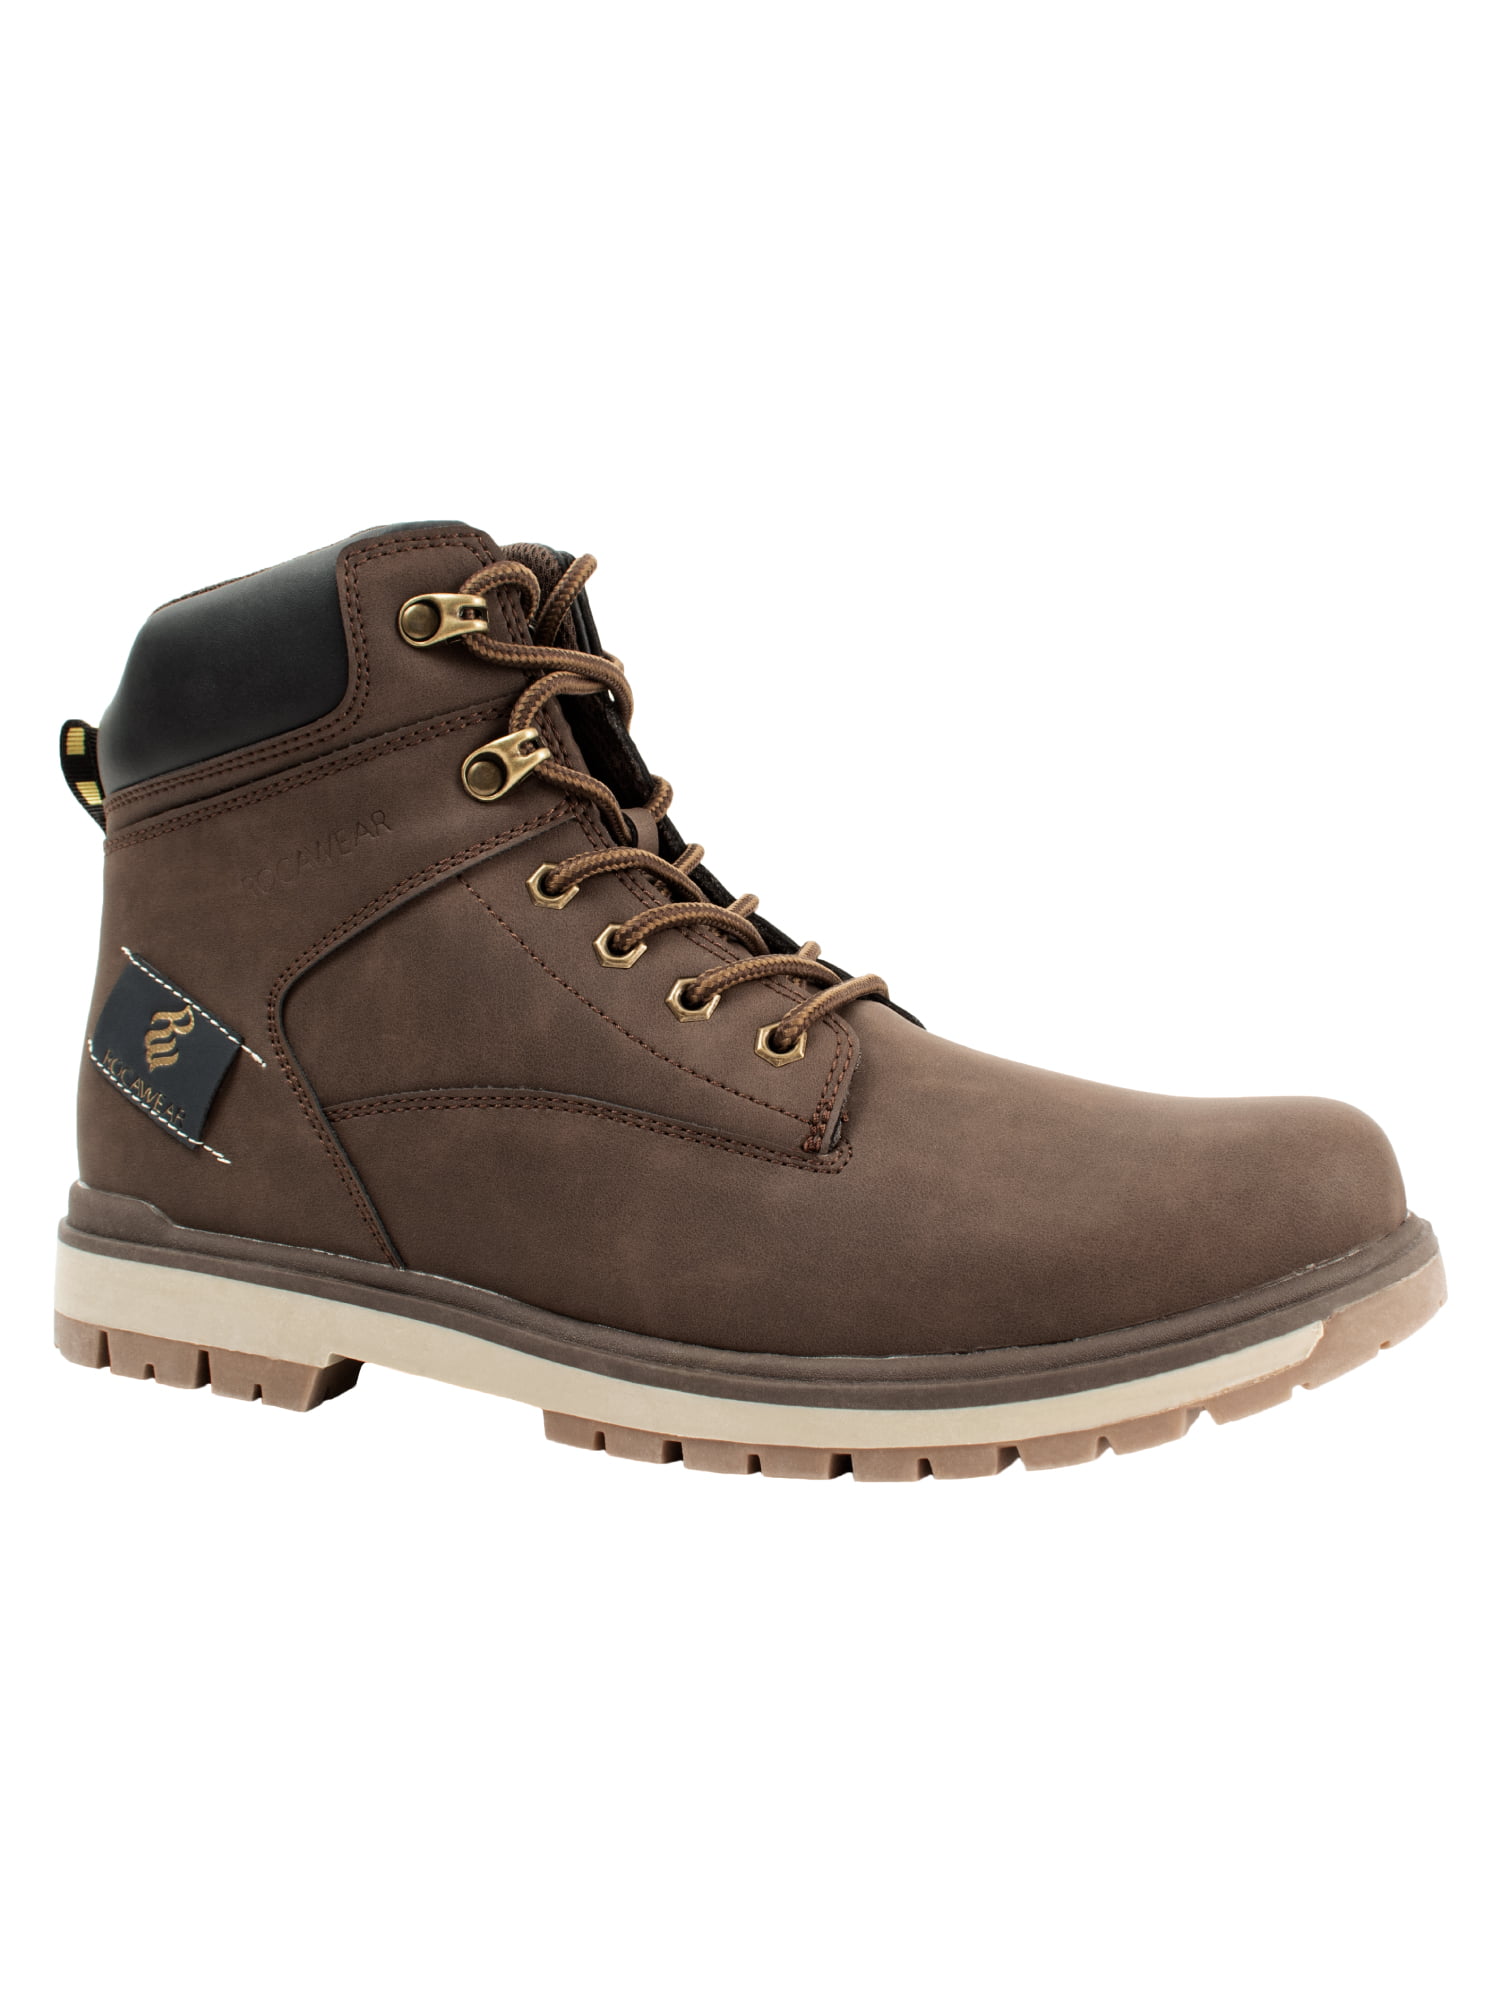 Buy > rocawear lincoln boots > in stock